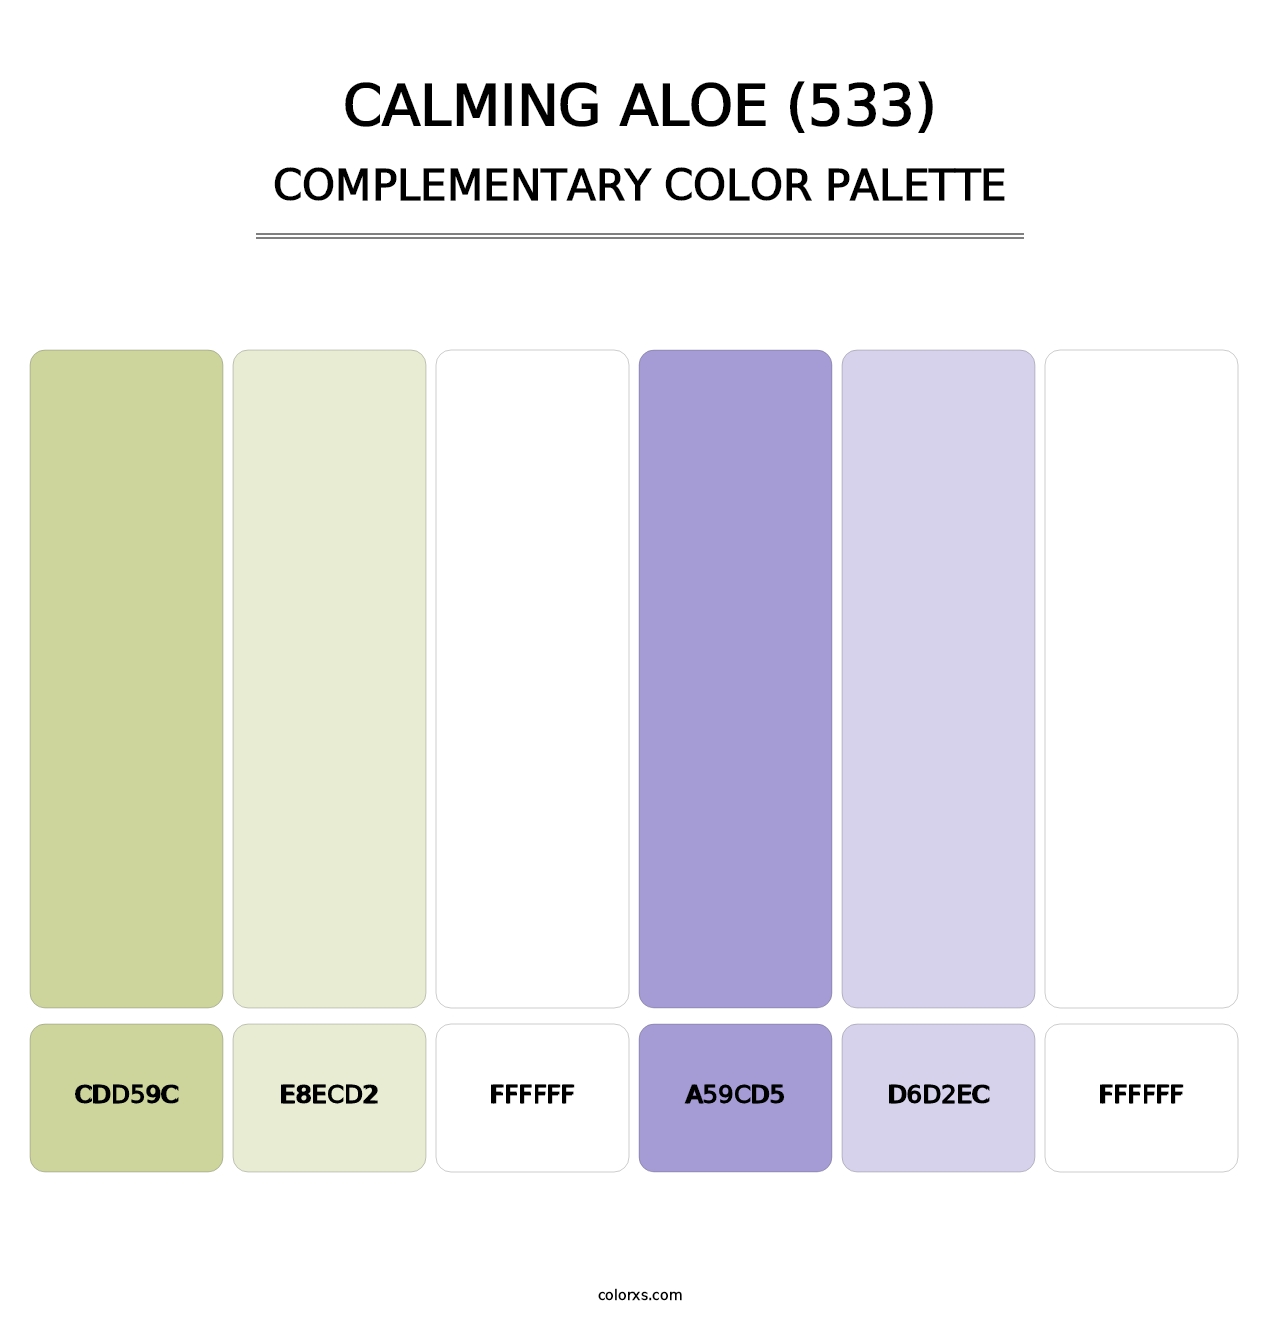 Calming Aloe (533) - Complementary Color Palette